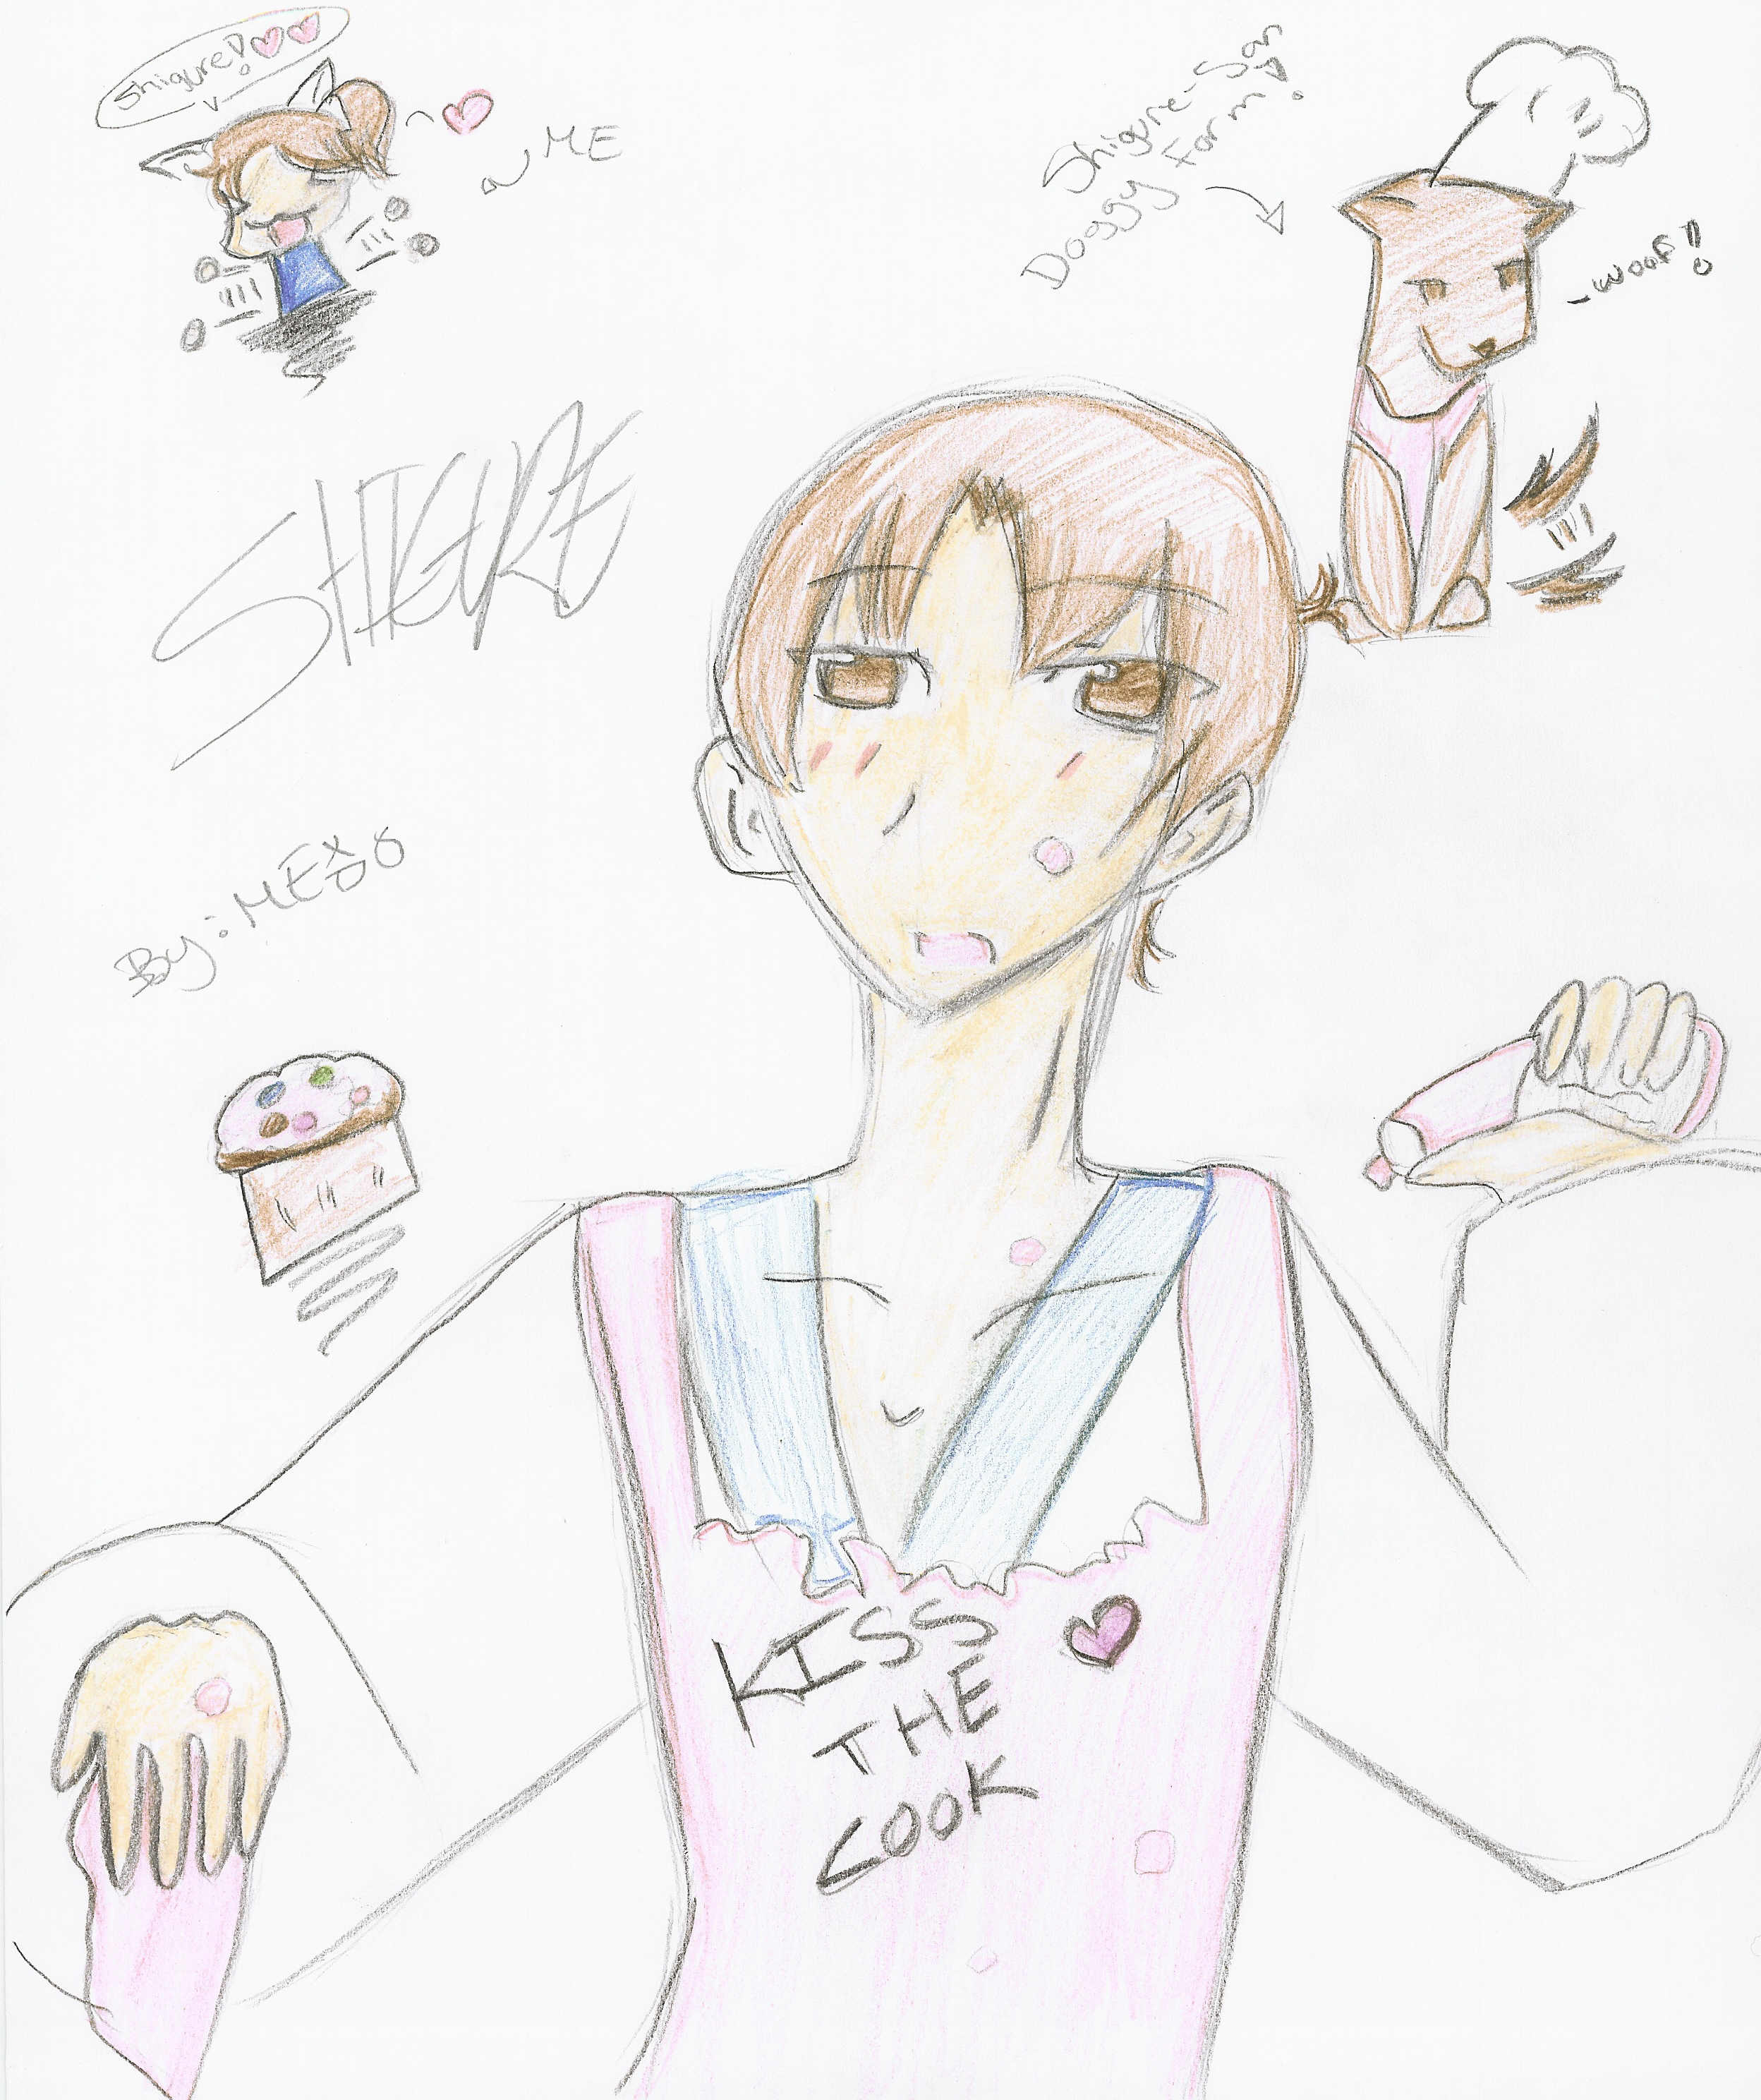 Shigure the cook by MEXD